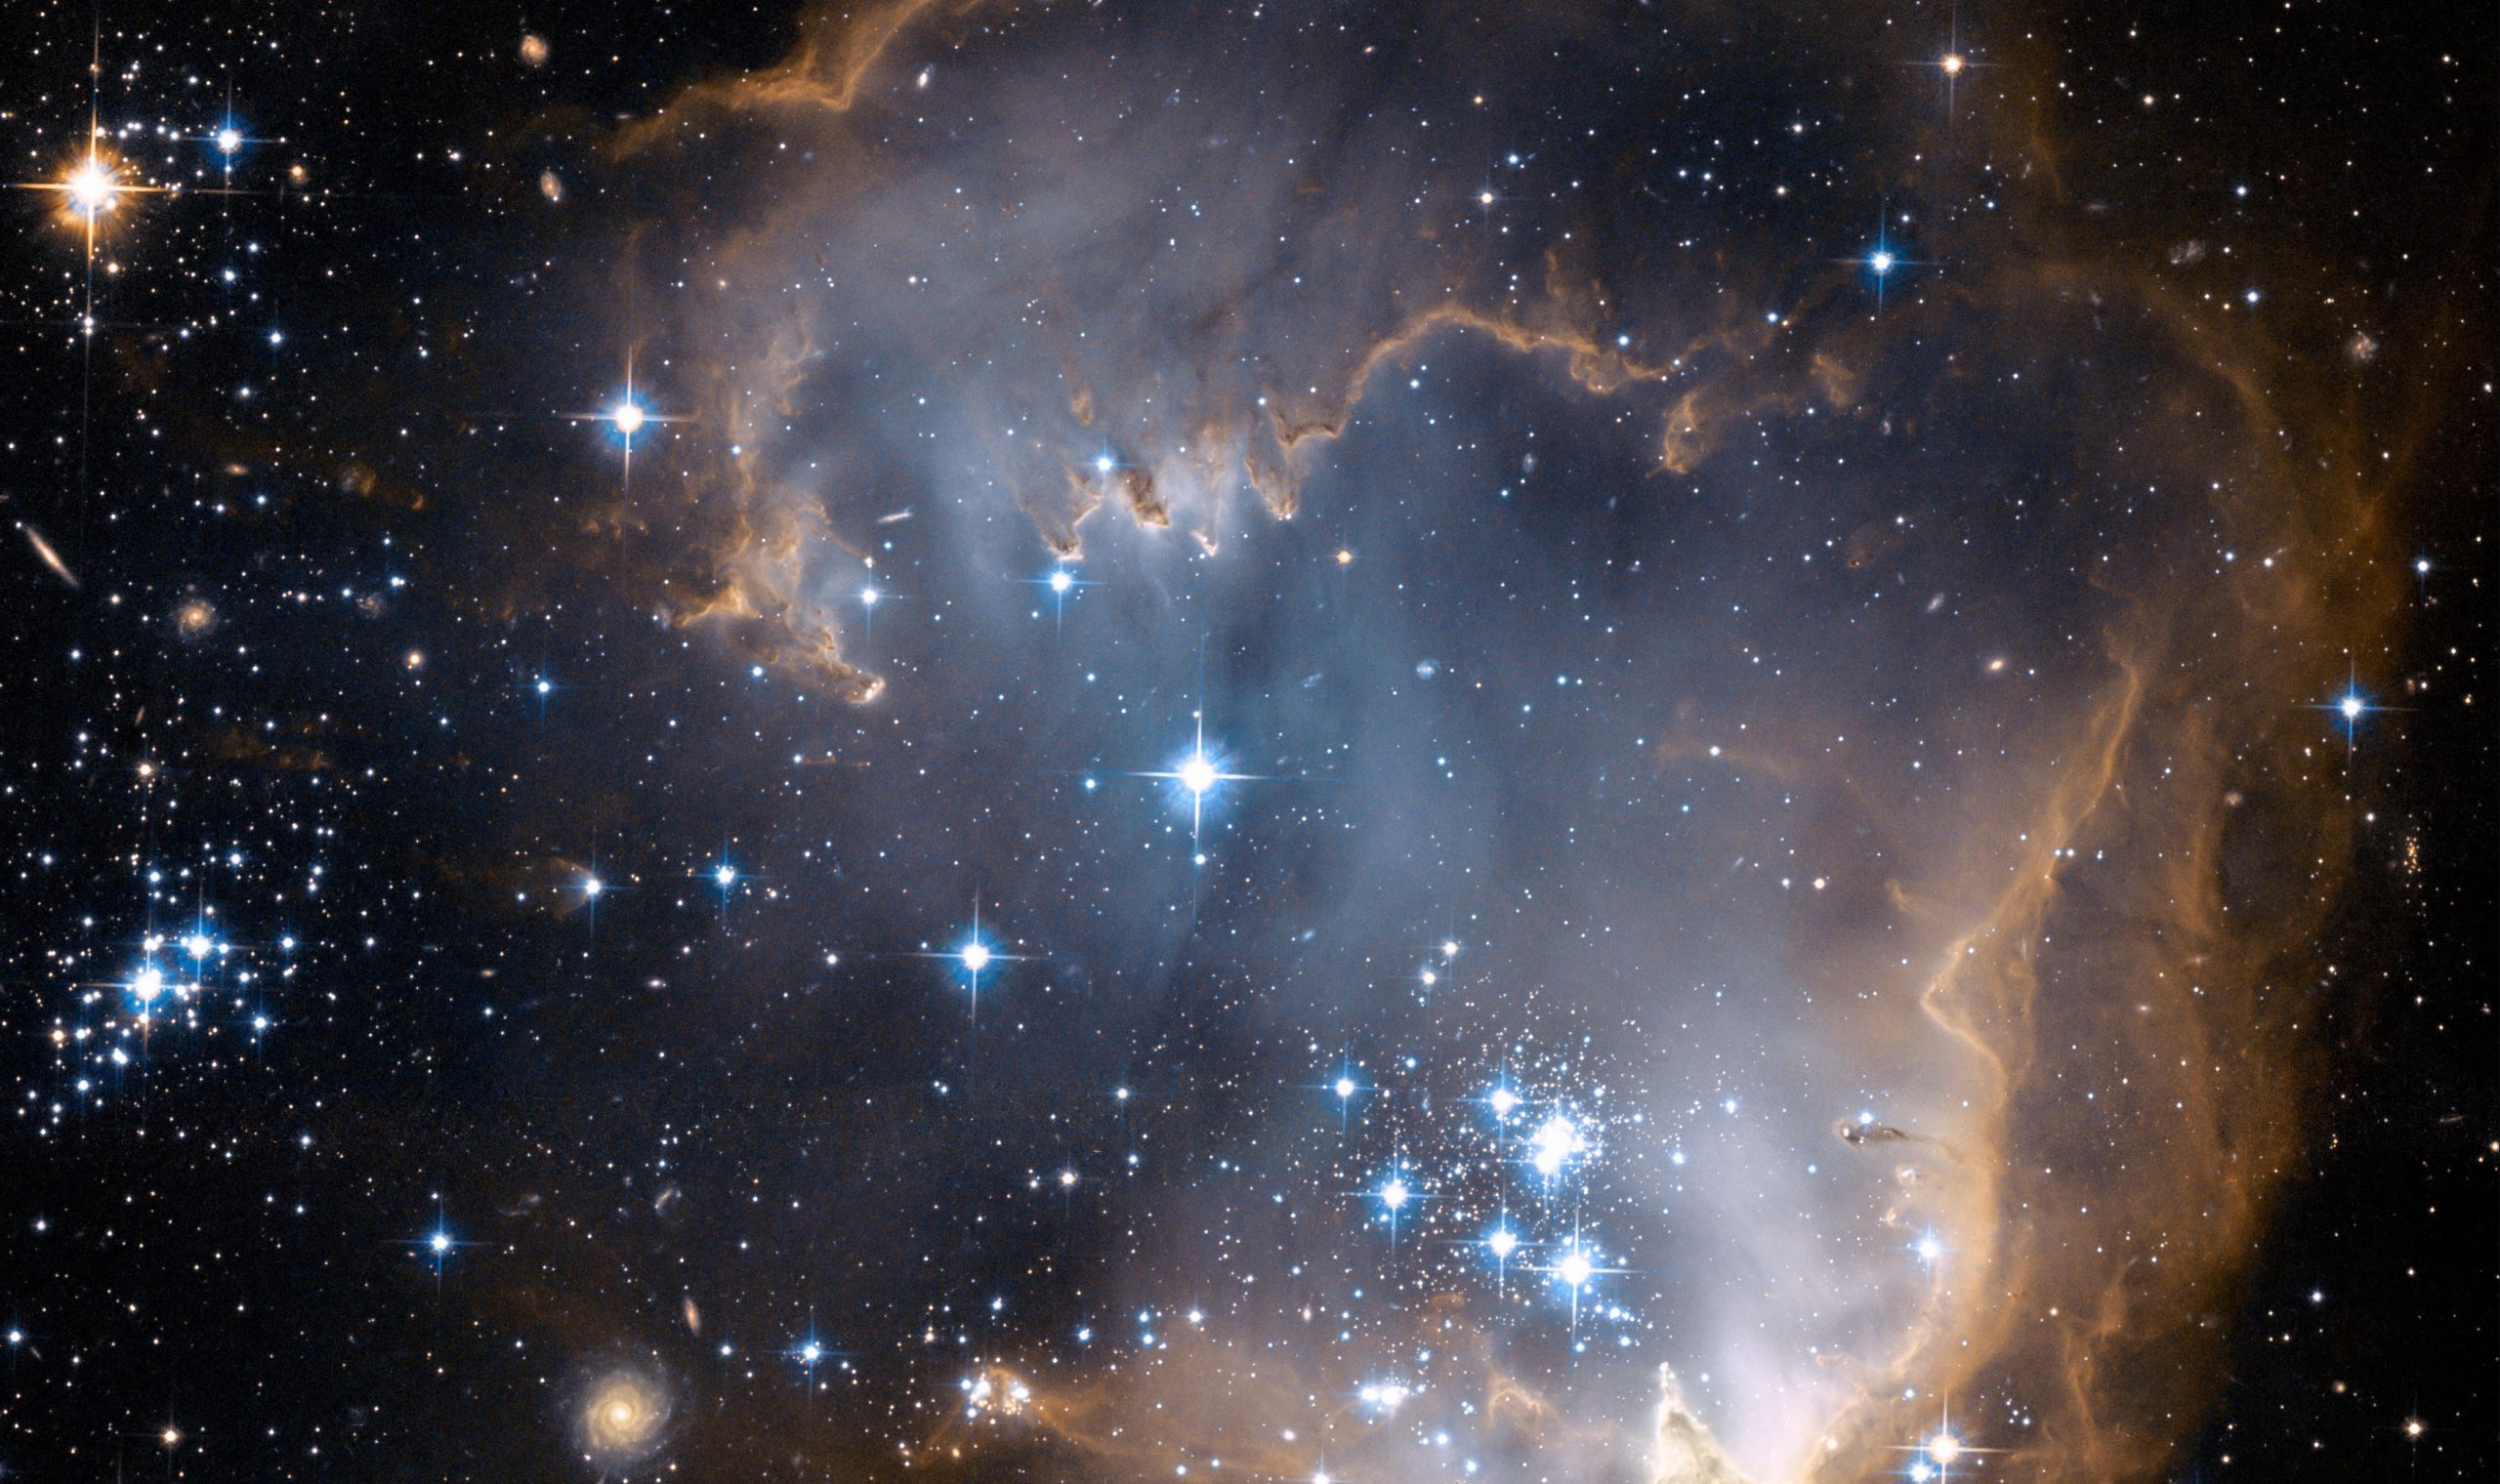 Hubble Space Telescope's ACS image of NGC 602 and N90. Image Credit: NASA, ESA, and the Hubble Heritage Team (STScI/AURA)-ESA/Hubble Collaboration.